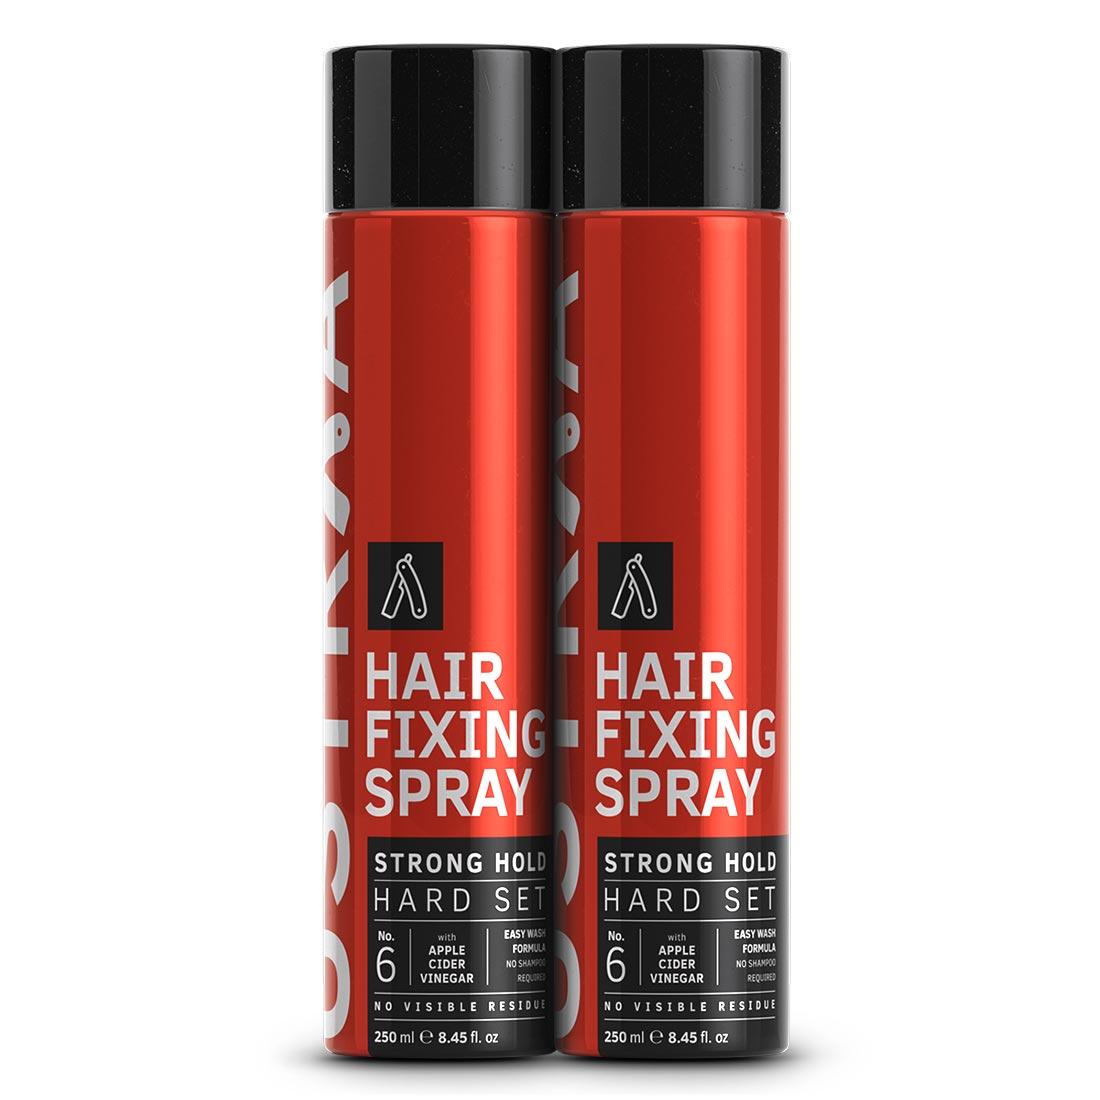 Tresemme Firm Hold Styling Hair Spray 400ml | Dis-Chem